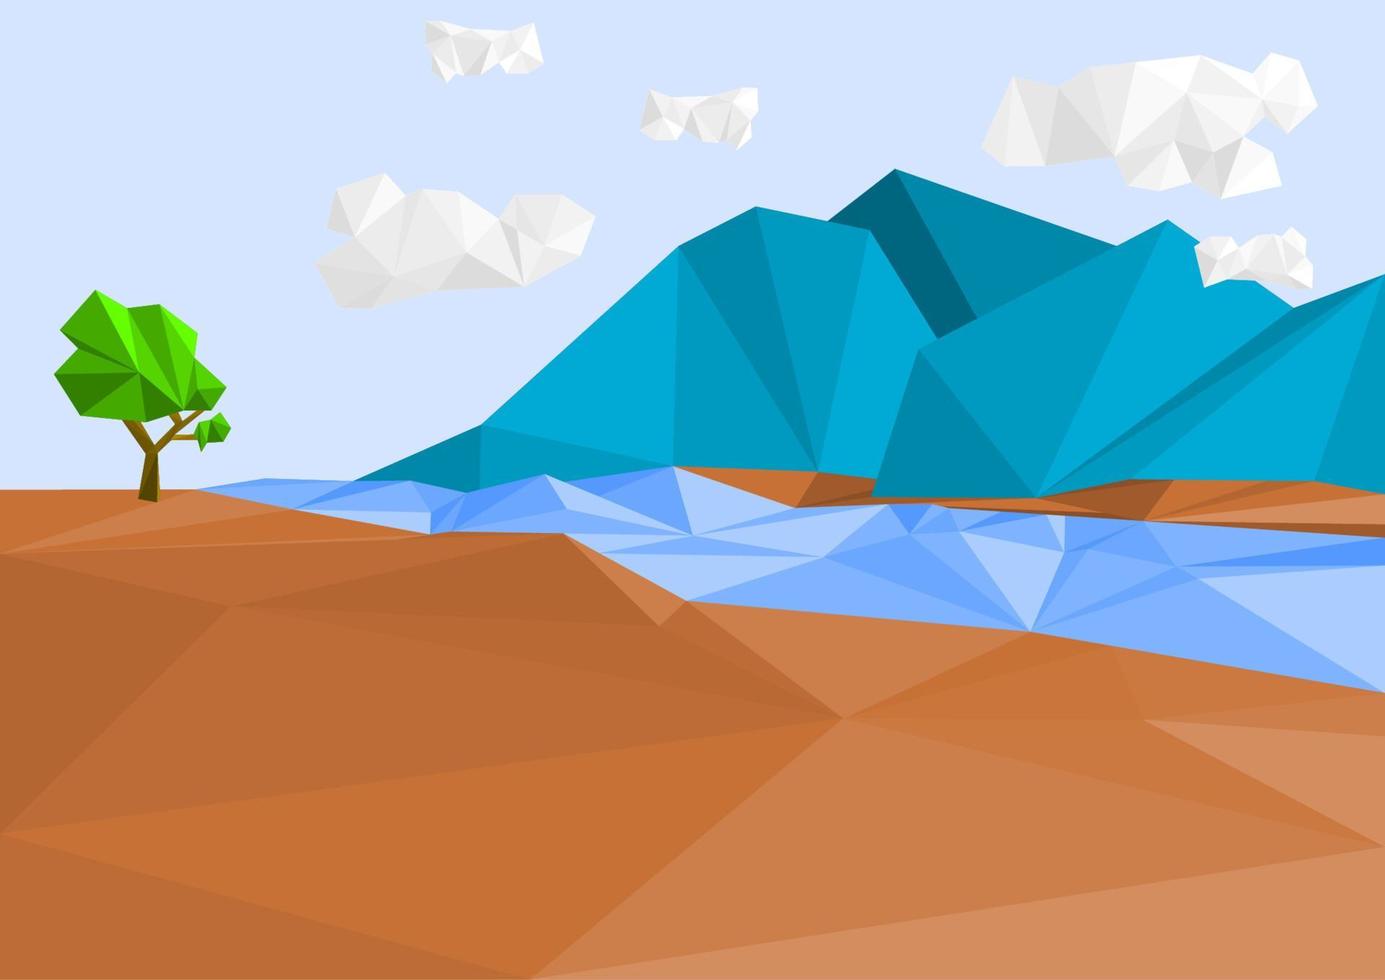 Editable Vector of Landscape Illustration in Low Poly Style as Scenery Background Element